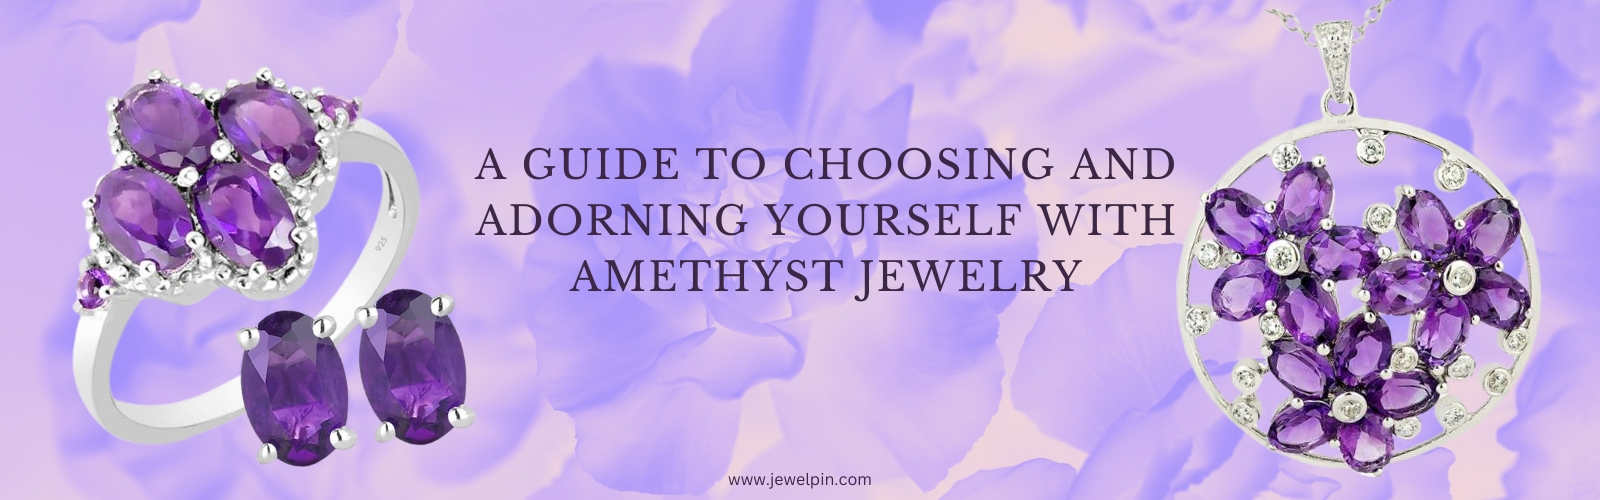 A Guide to Choosing and Adorning Yourself with Amethyst Jewellery - Jewelpin